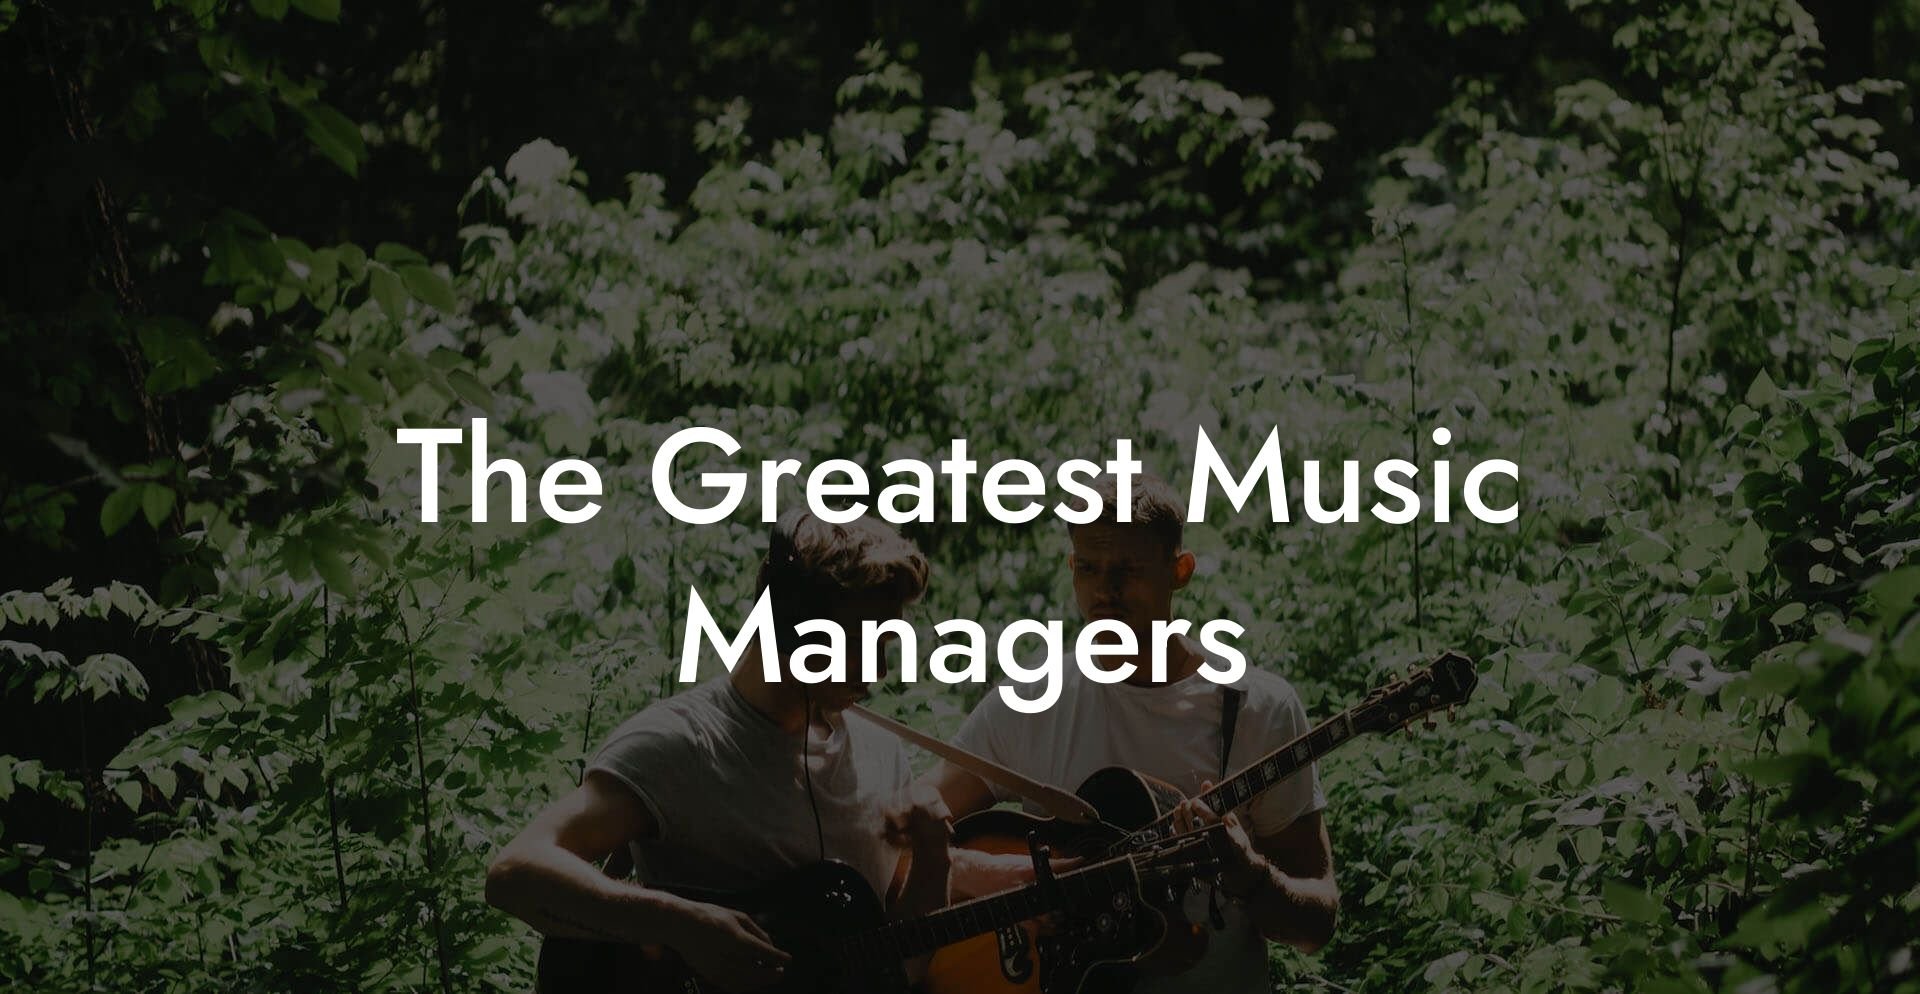 The Greatest Music Managers